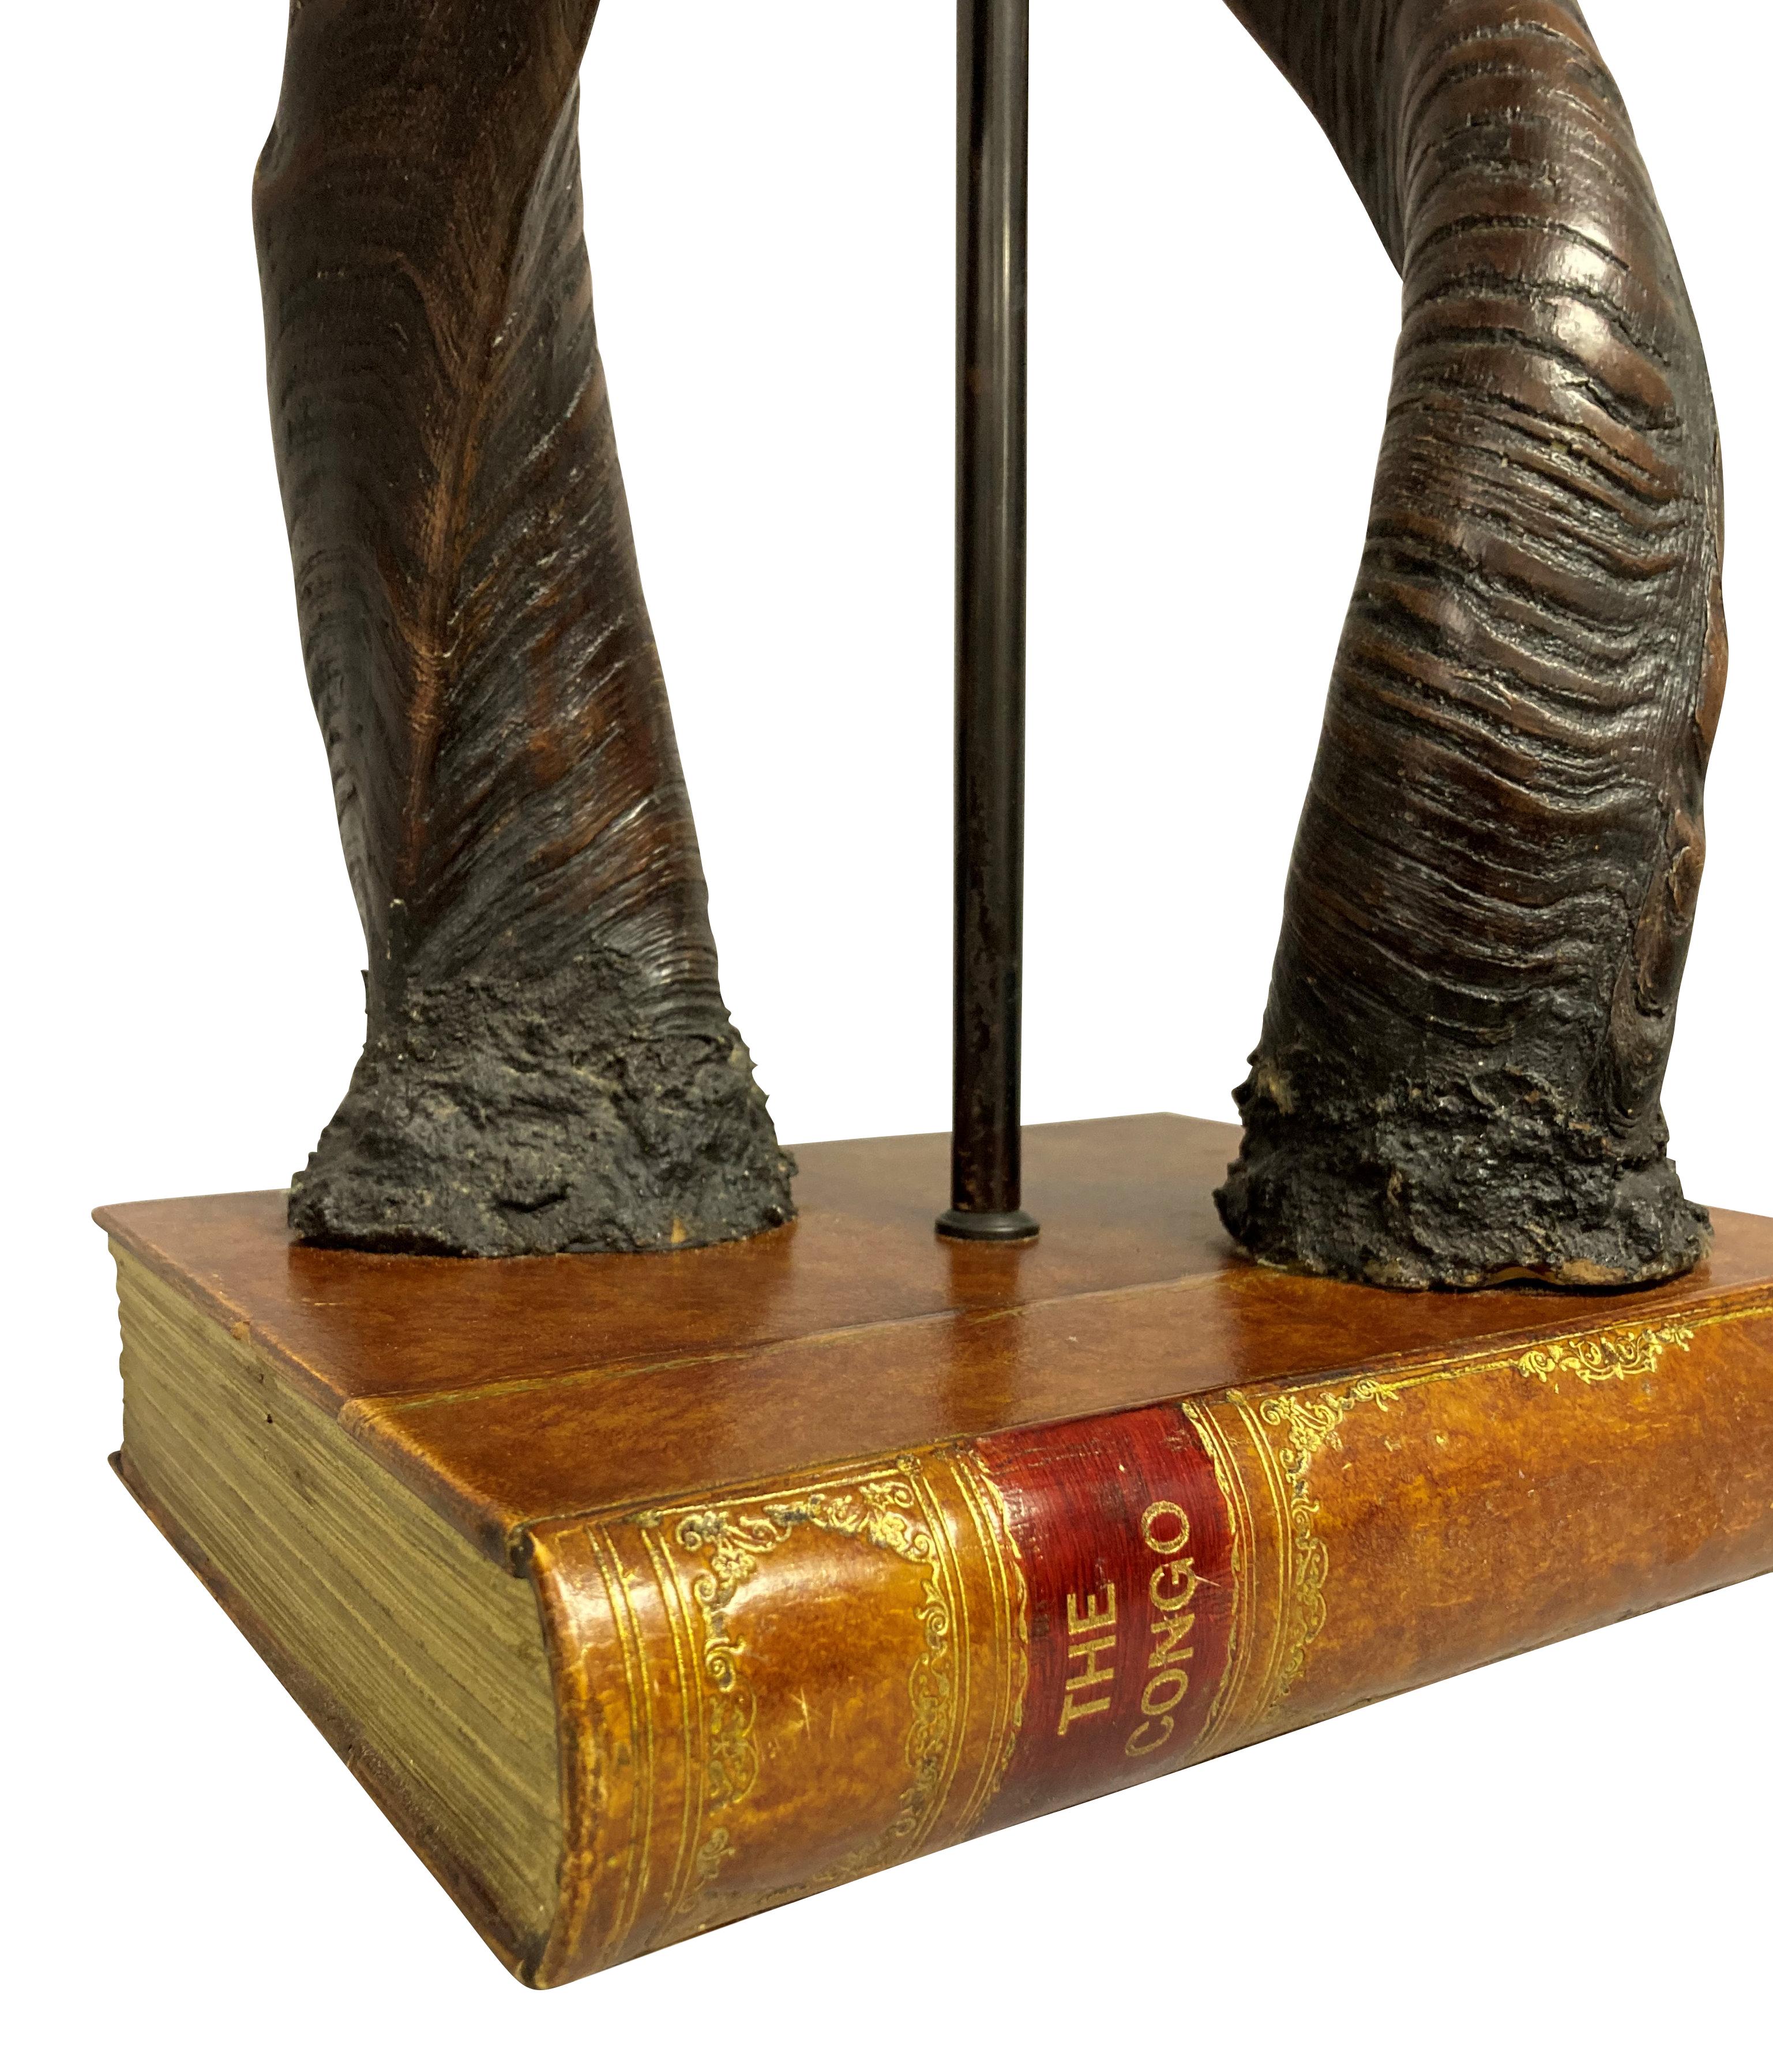 A table lamp made from a pair of antique antelope horns, mounted on a faux leather book, with a central bronzed light fitting.